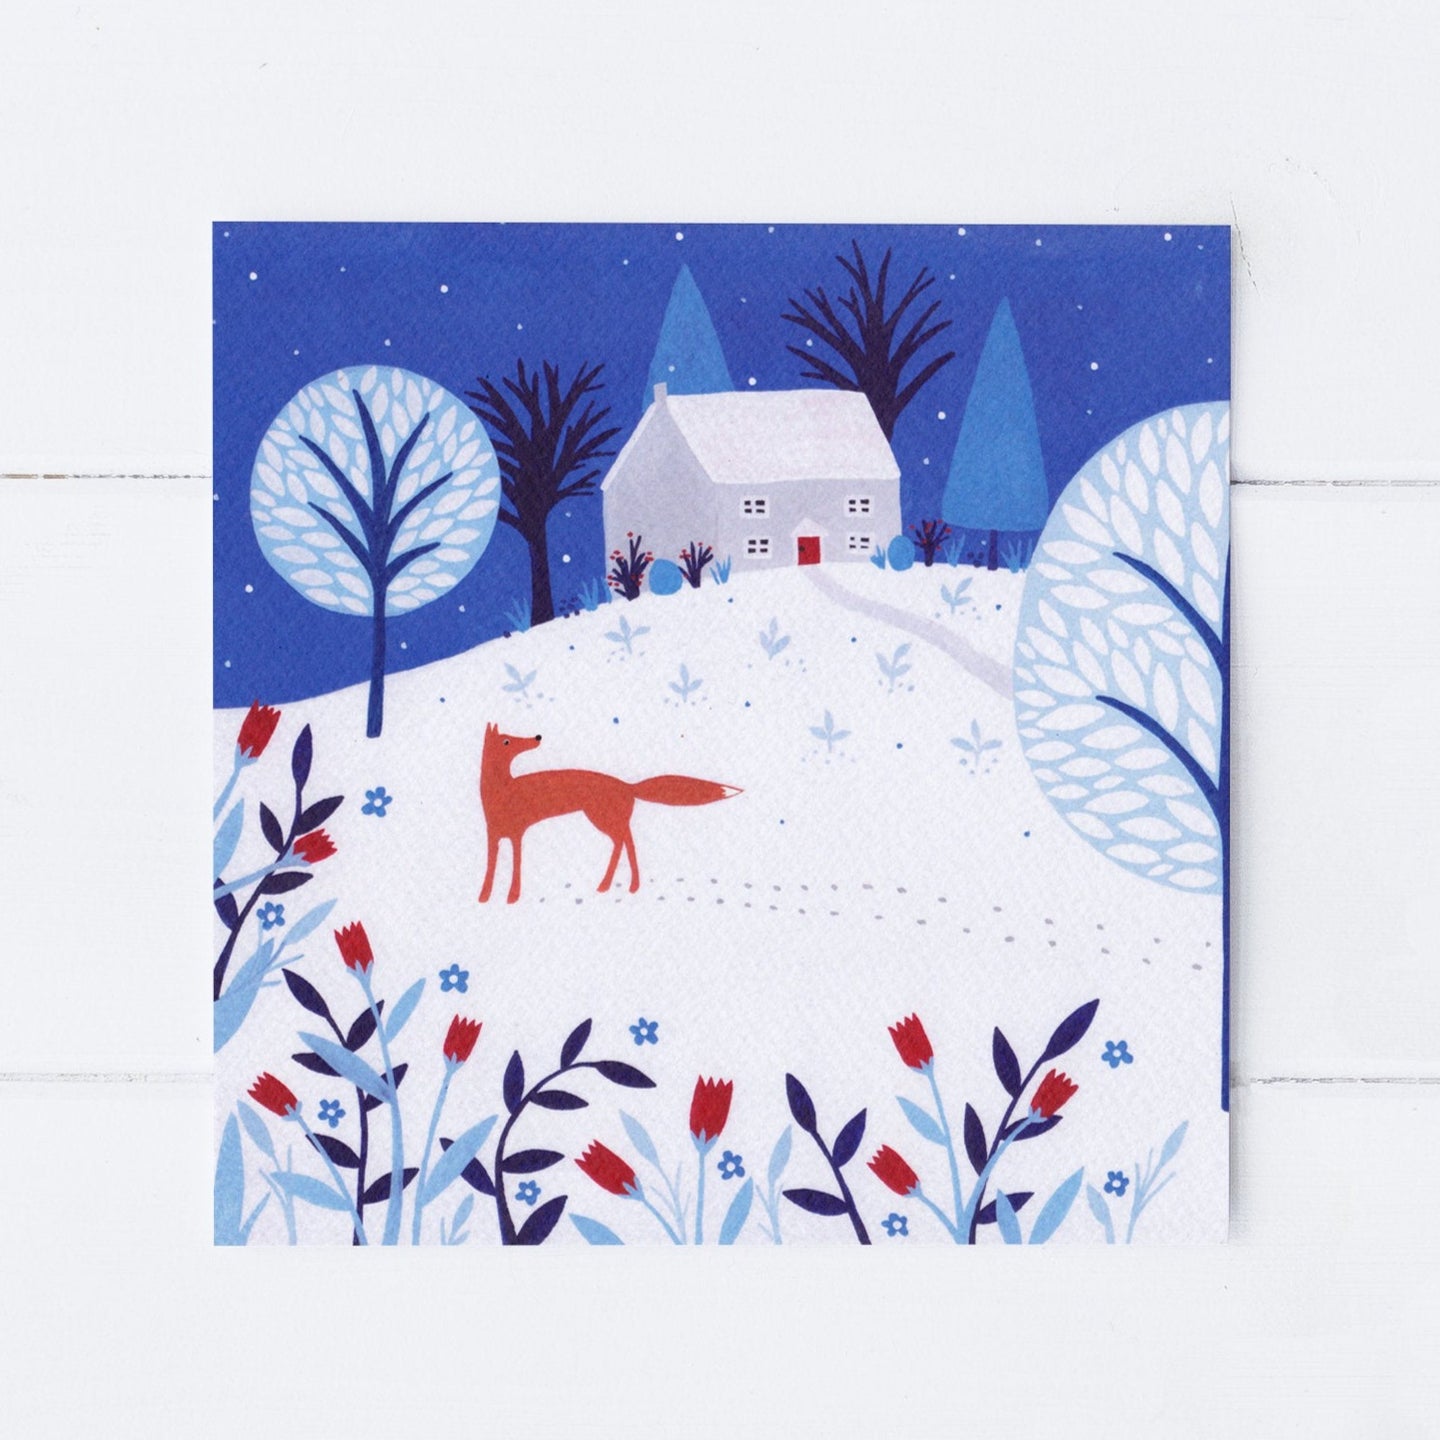 Winter Fox Cottage Greeting Card